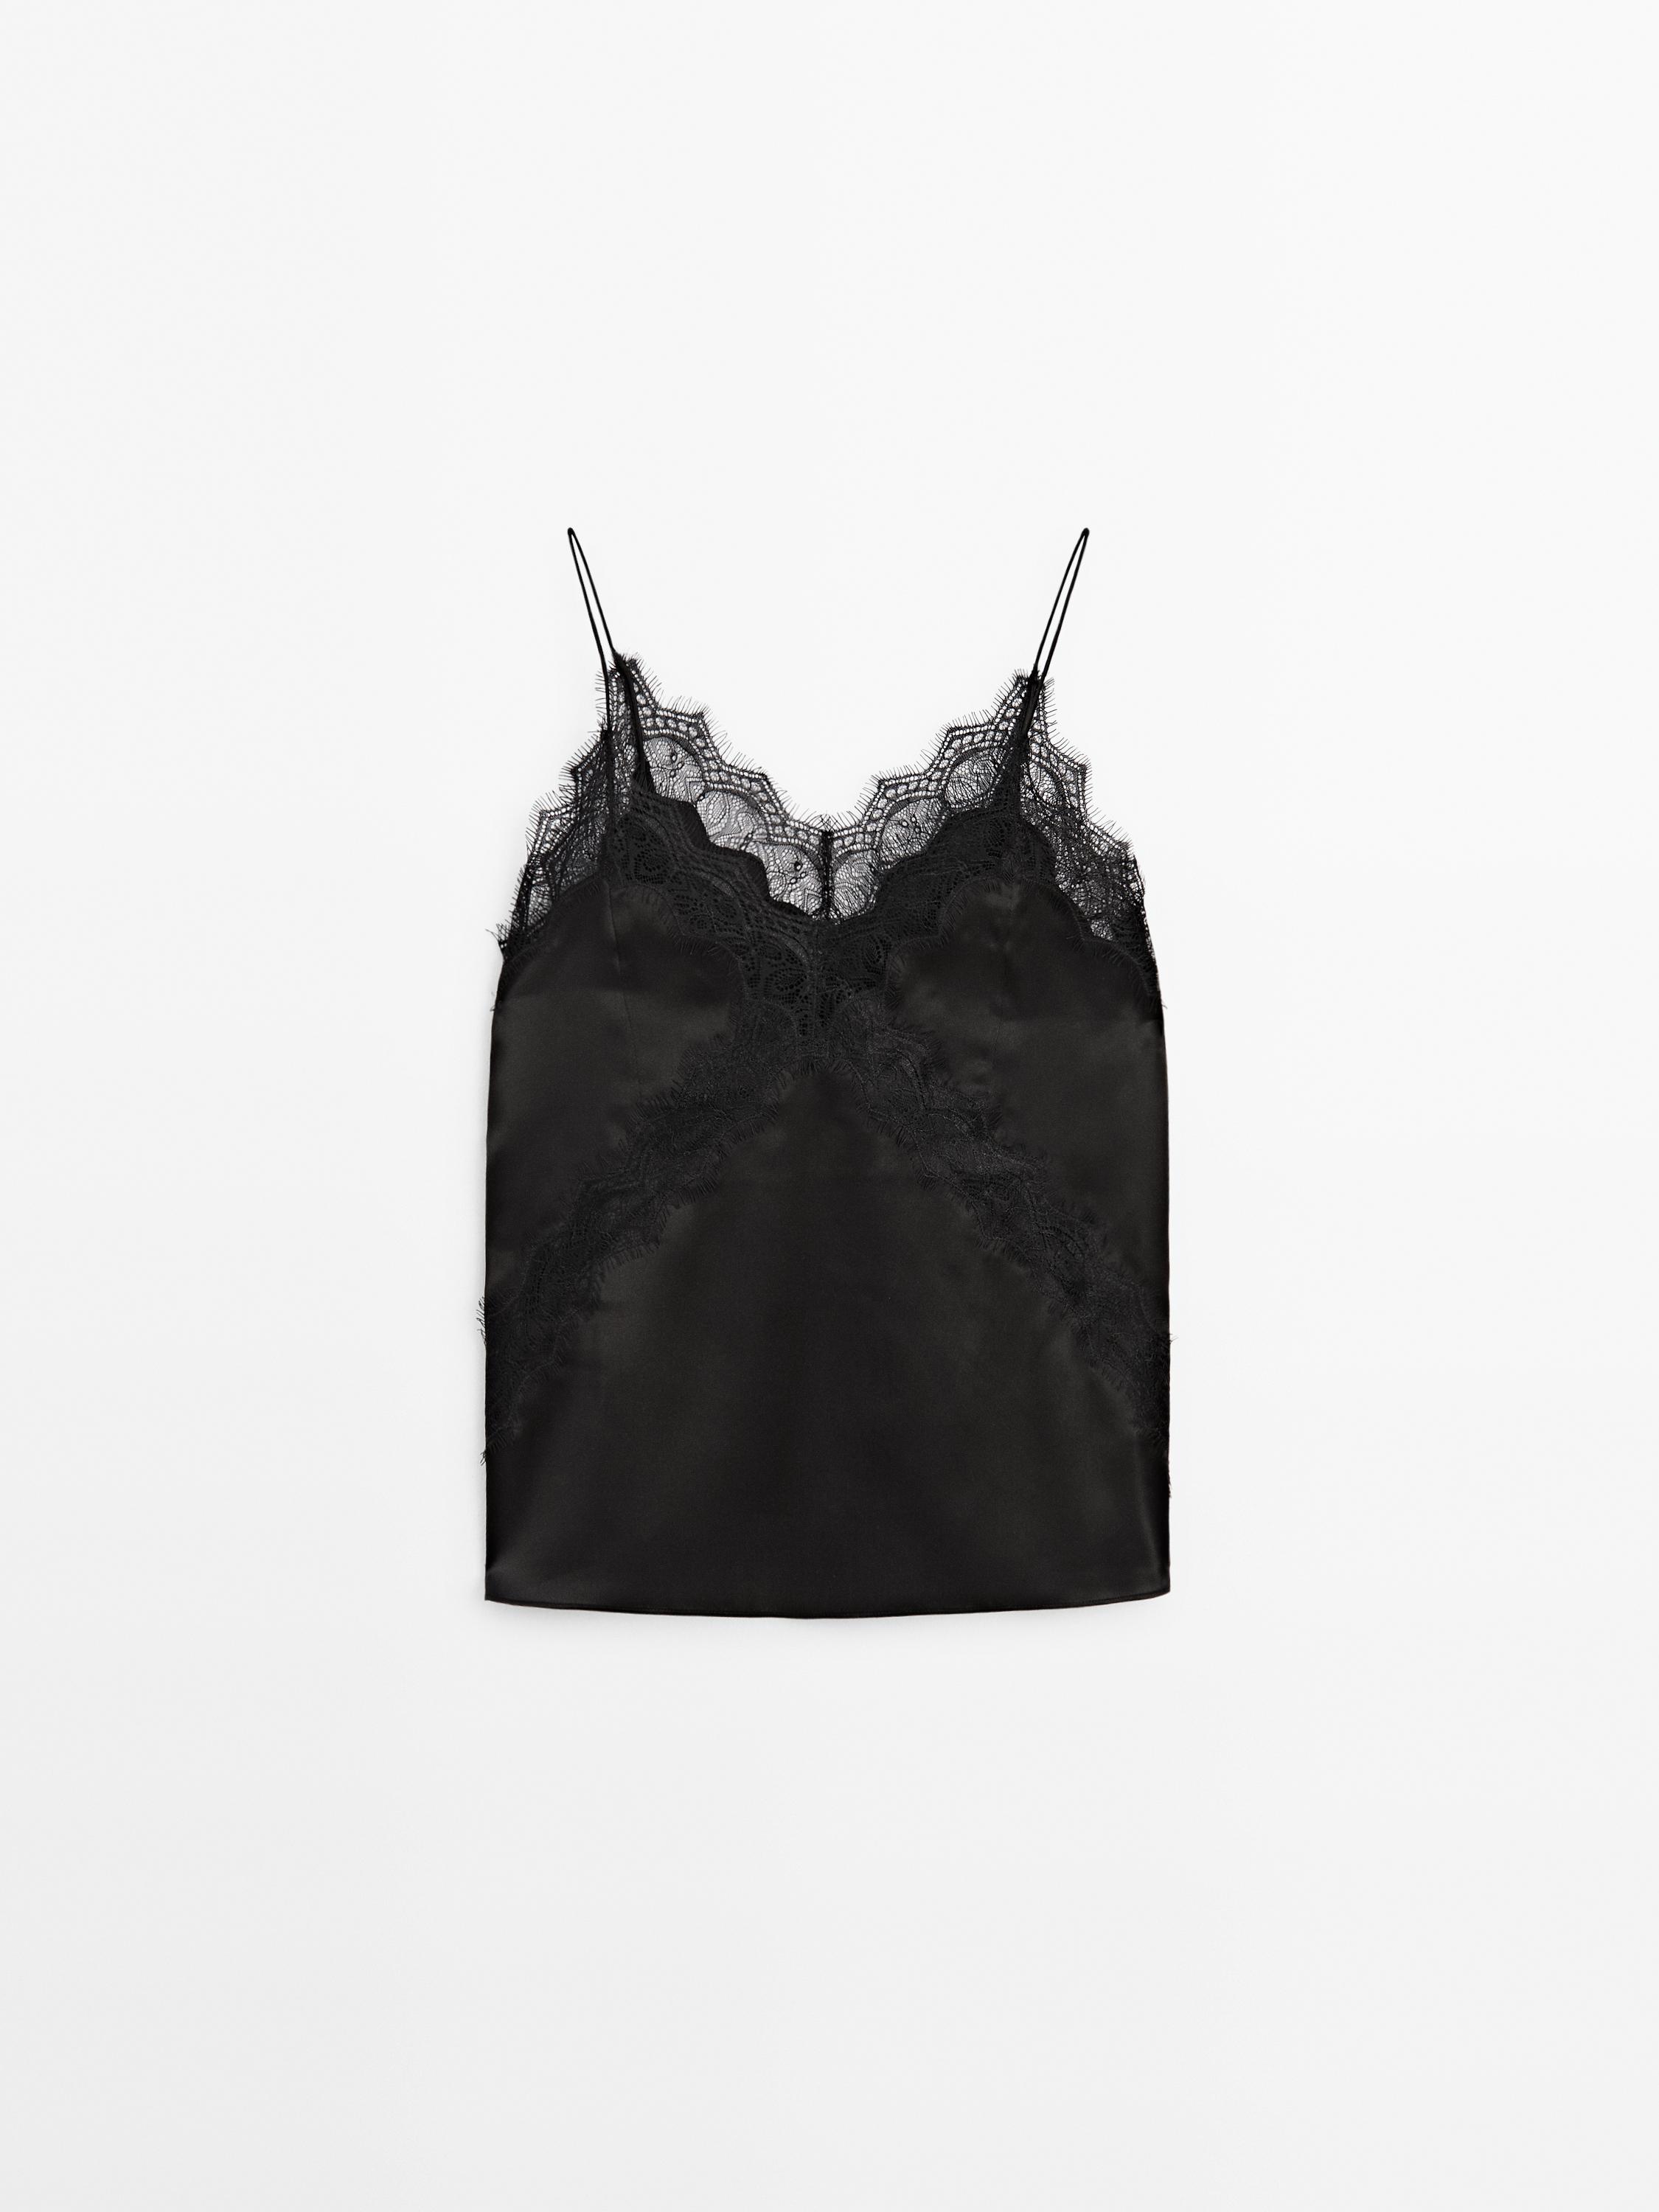 Camisole top with lace detail - Studio - Black | ZARA United States